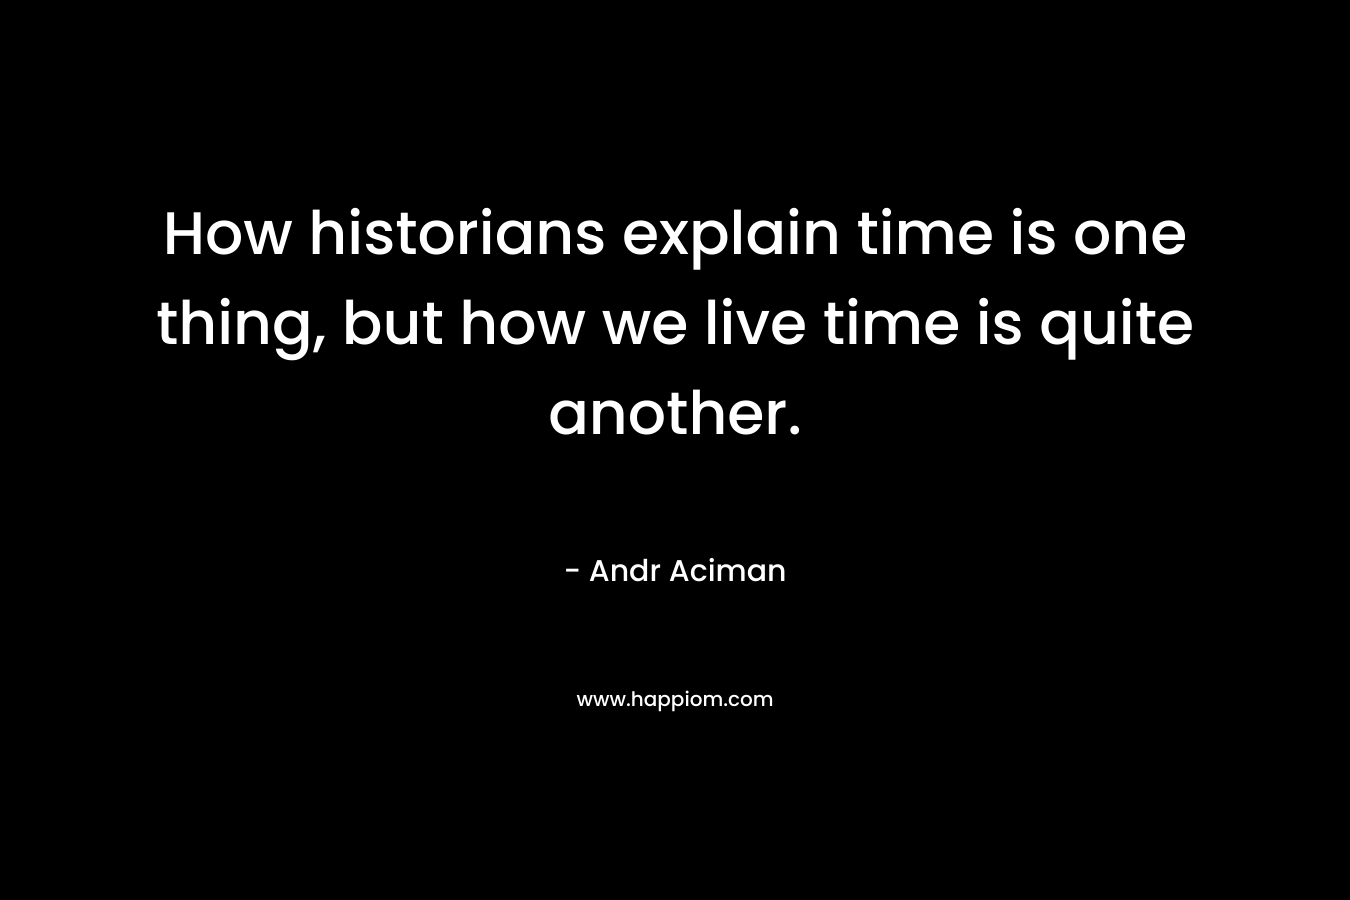 How historians explain time is one thing, but how we live time is quite another. – Andr Aciman